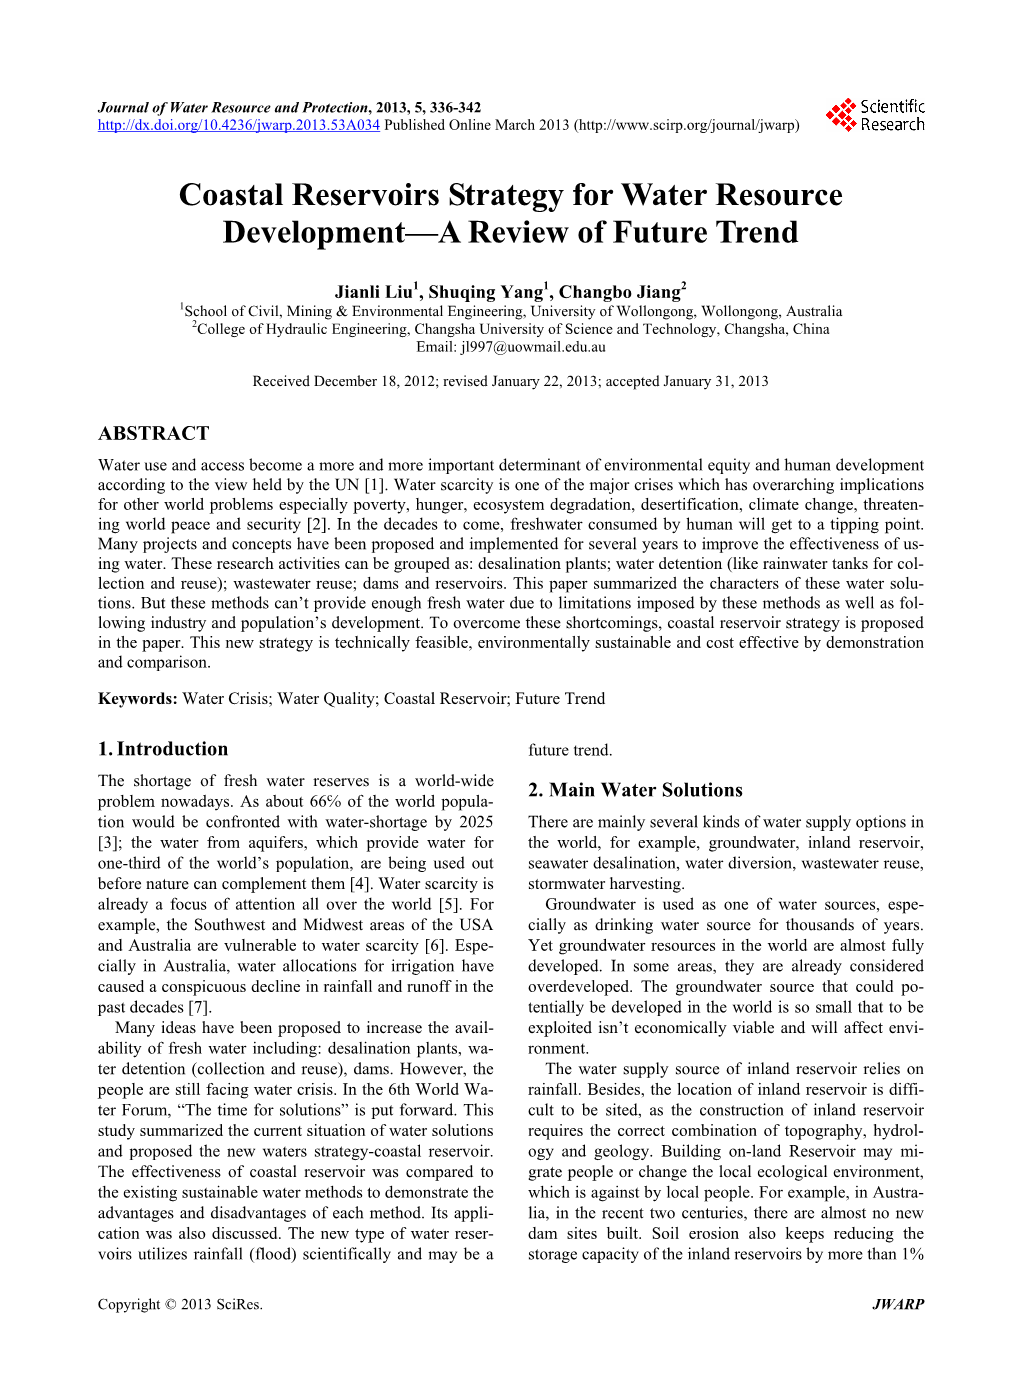 Coastal Reservoirs Strategy for Water Resource Development—A Review of Future Trend